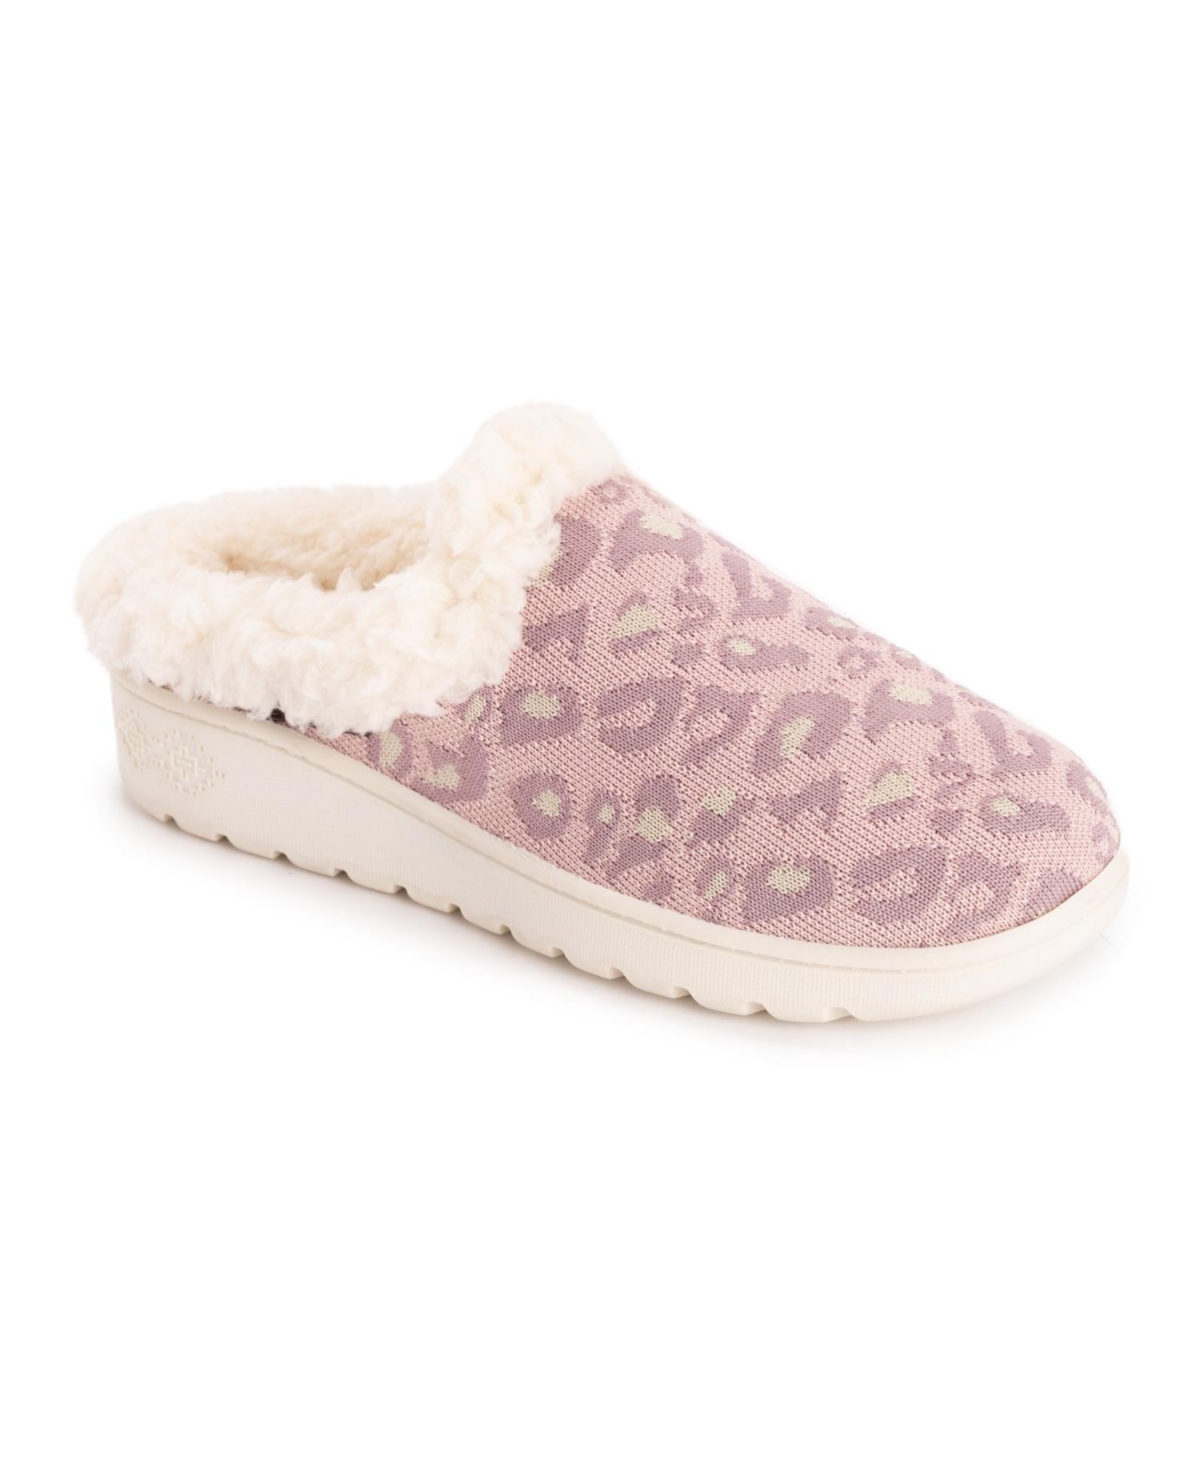 Women's Nony Fly knit Slippers - Blush